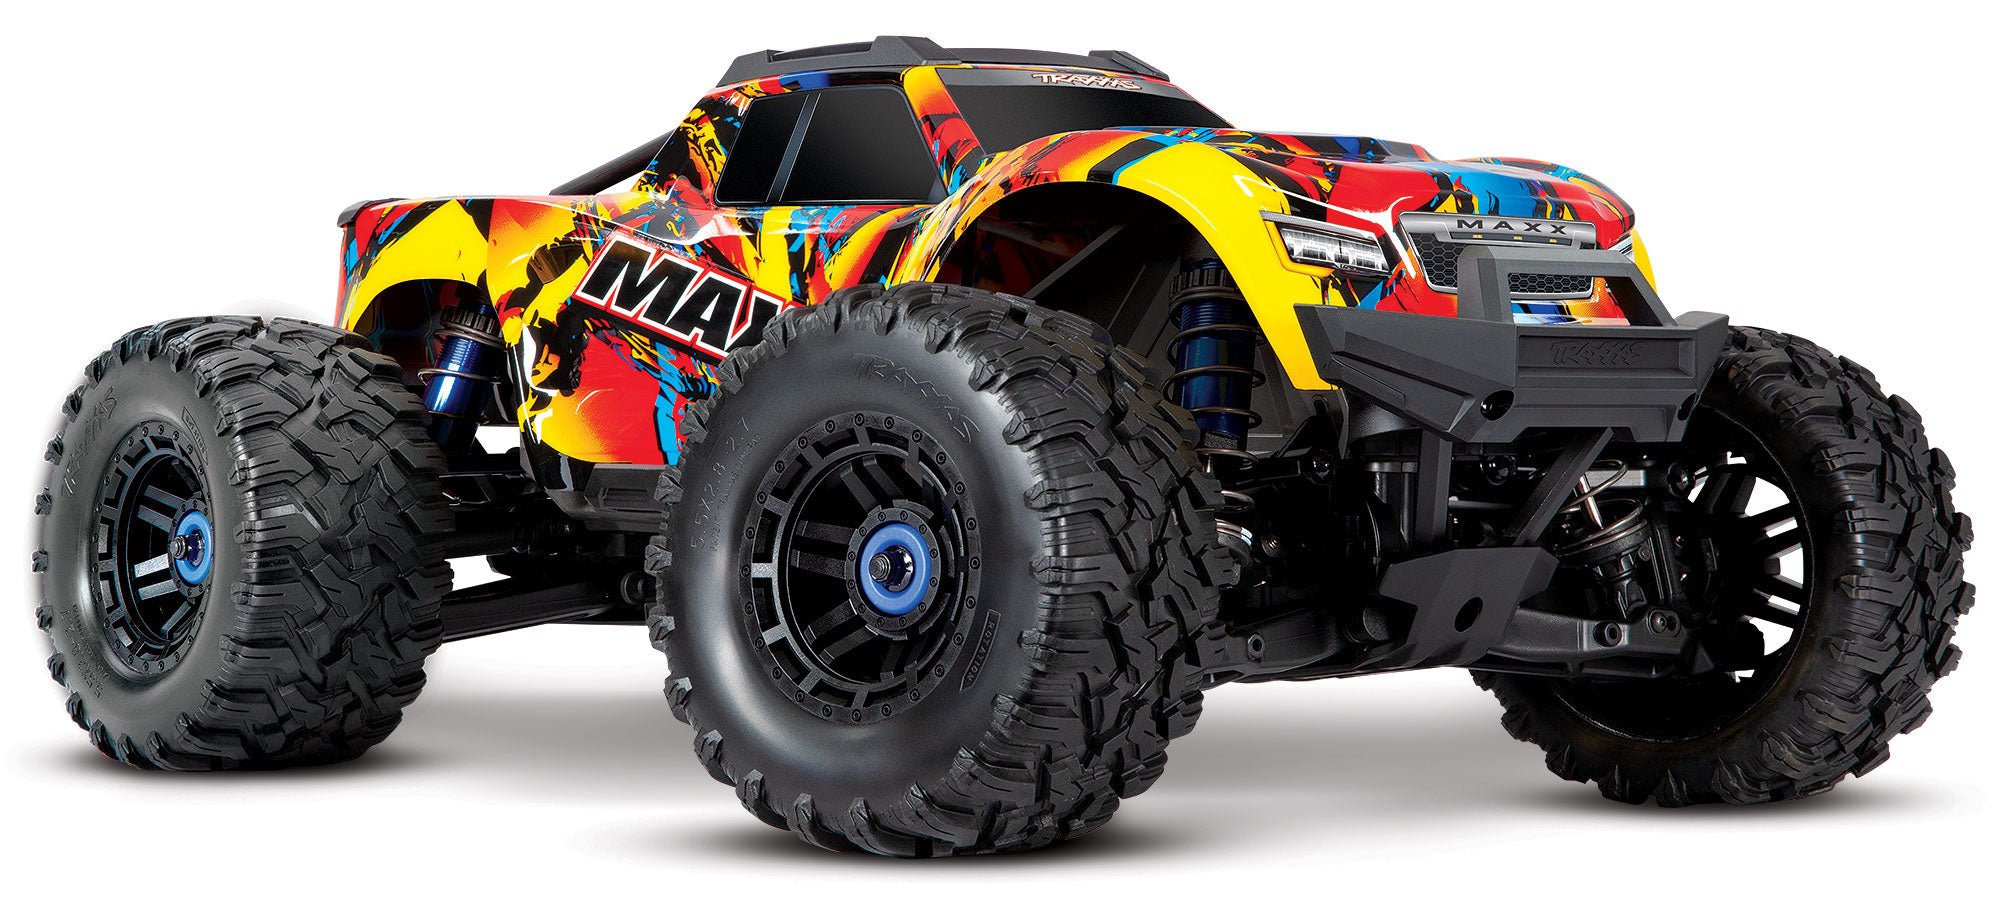 Traxxas Maxx 4Wd 1/10Scale Monster Truck -89076-4